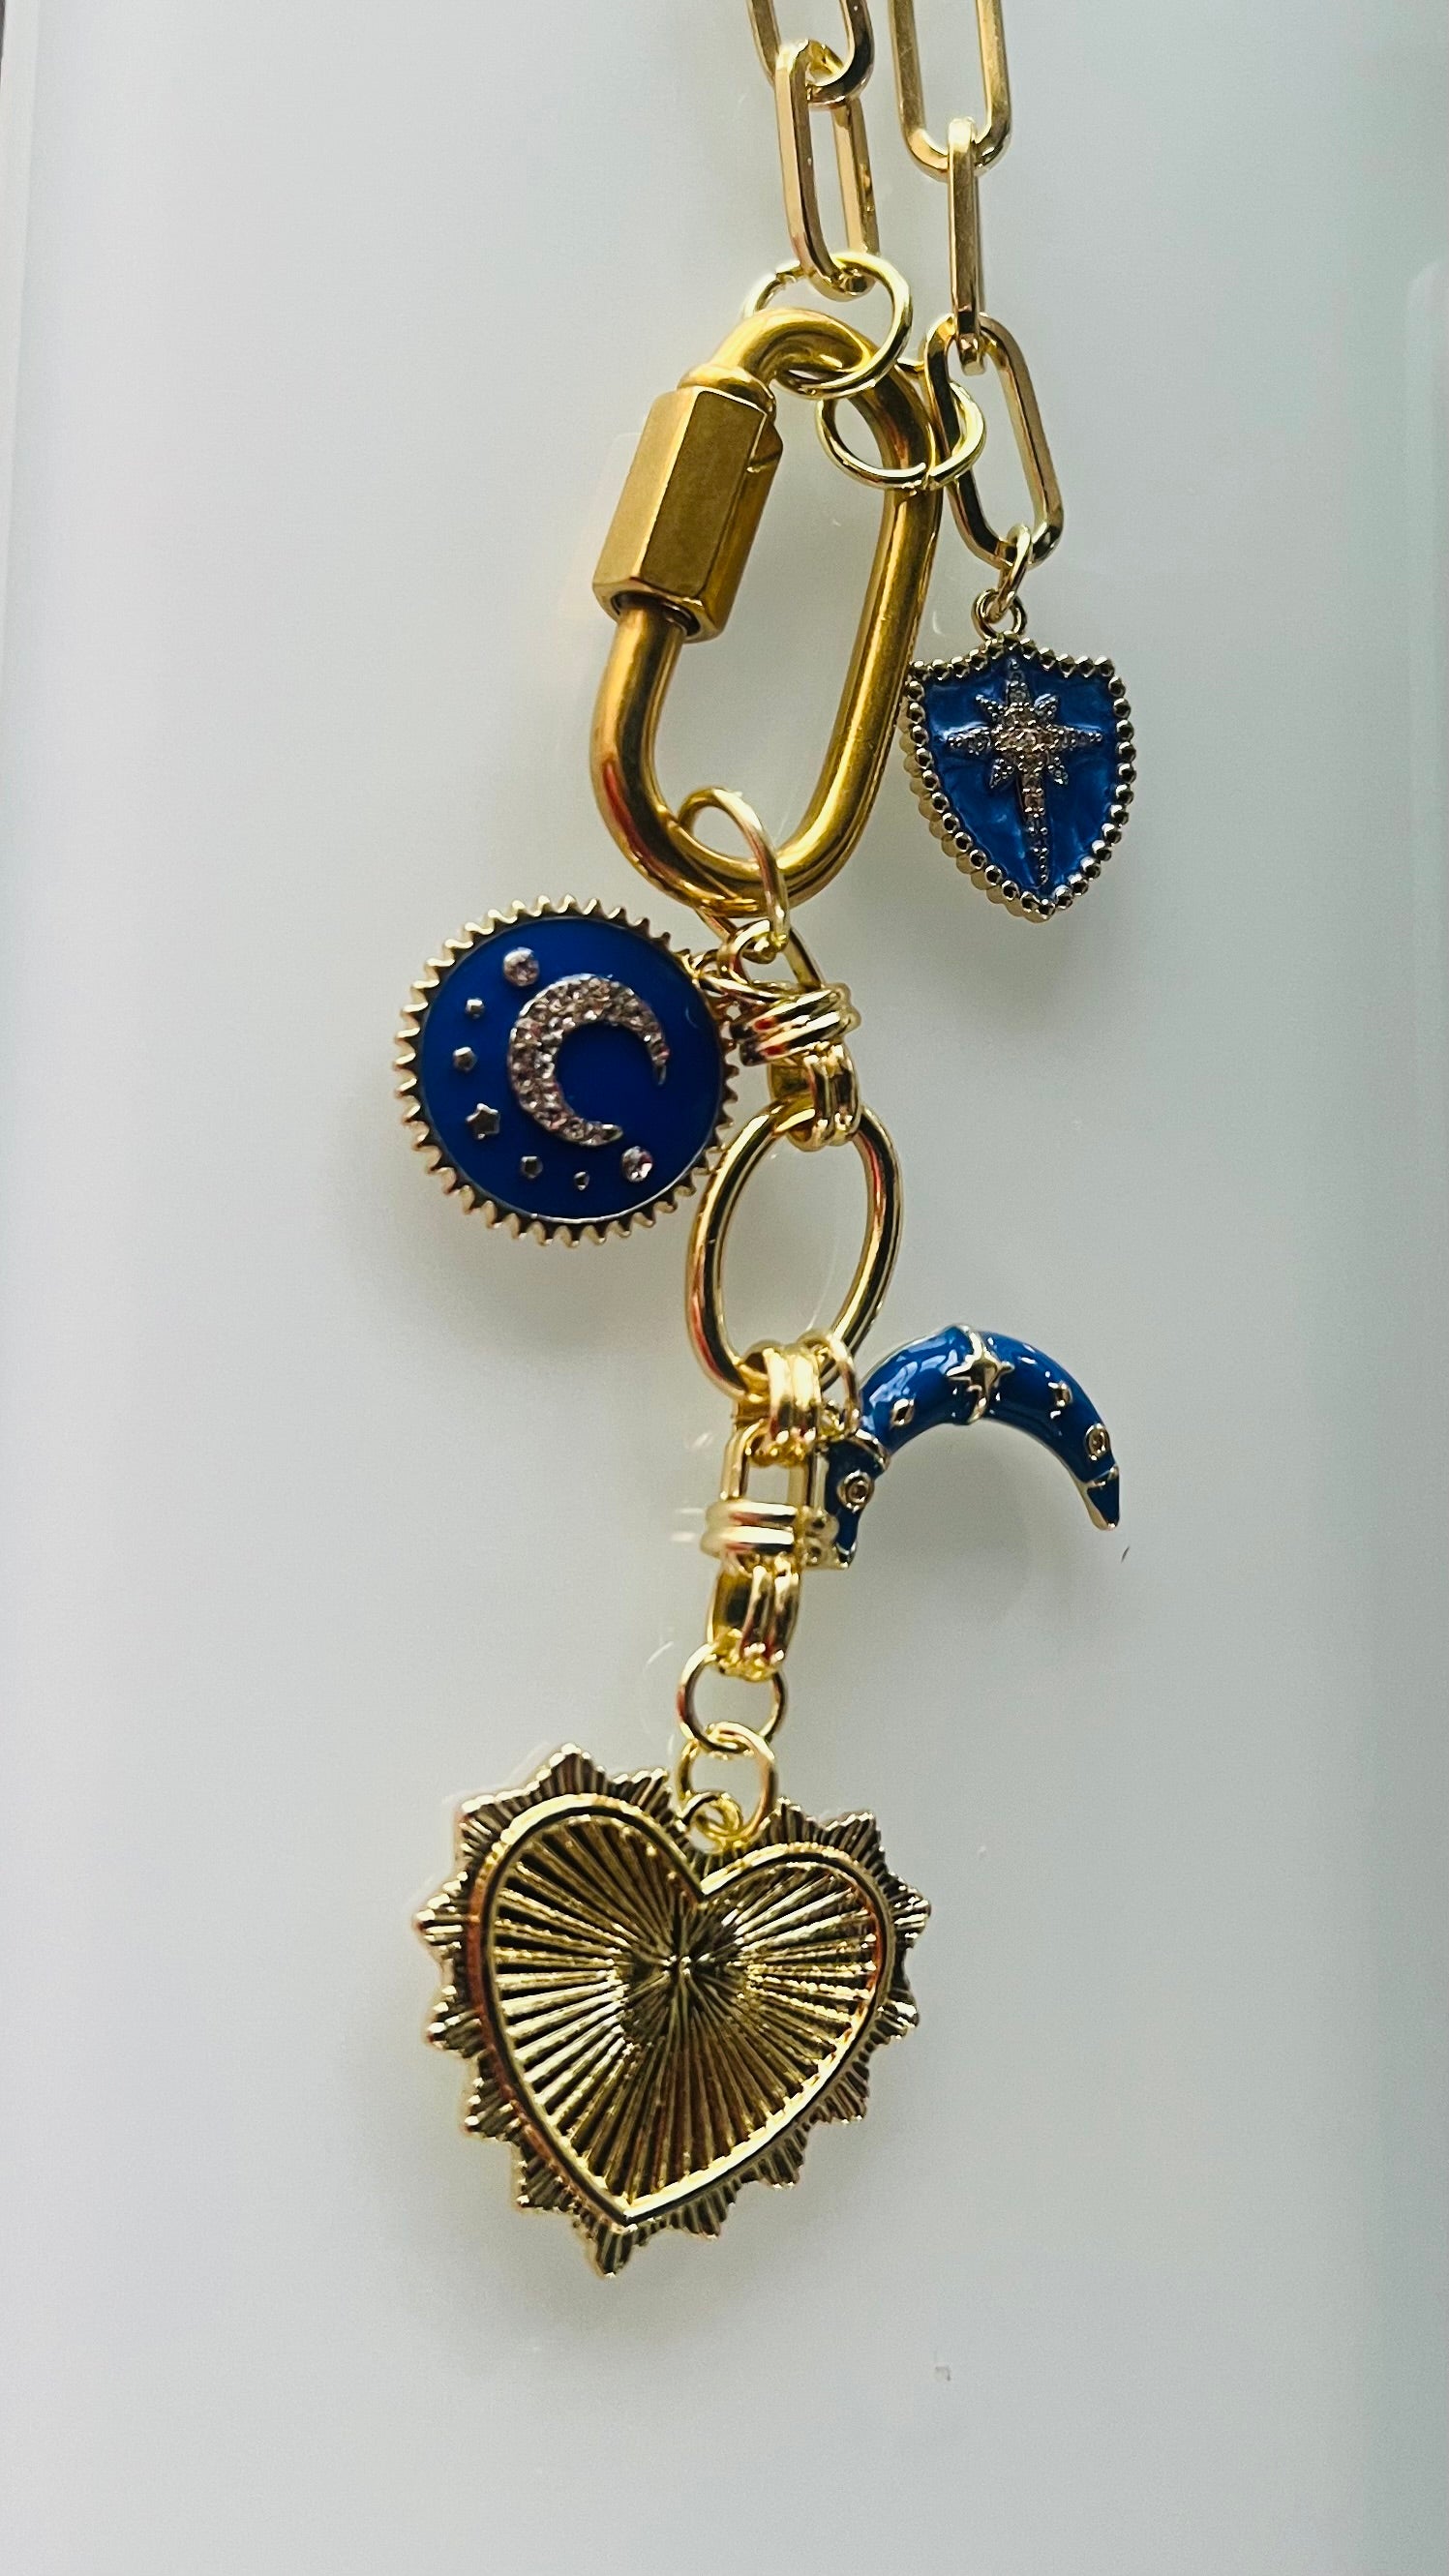 Necklace gold plated blue moon, heart